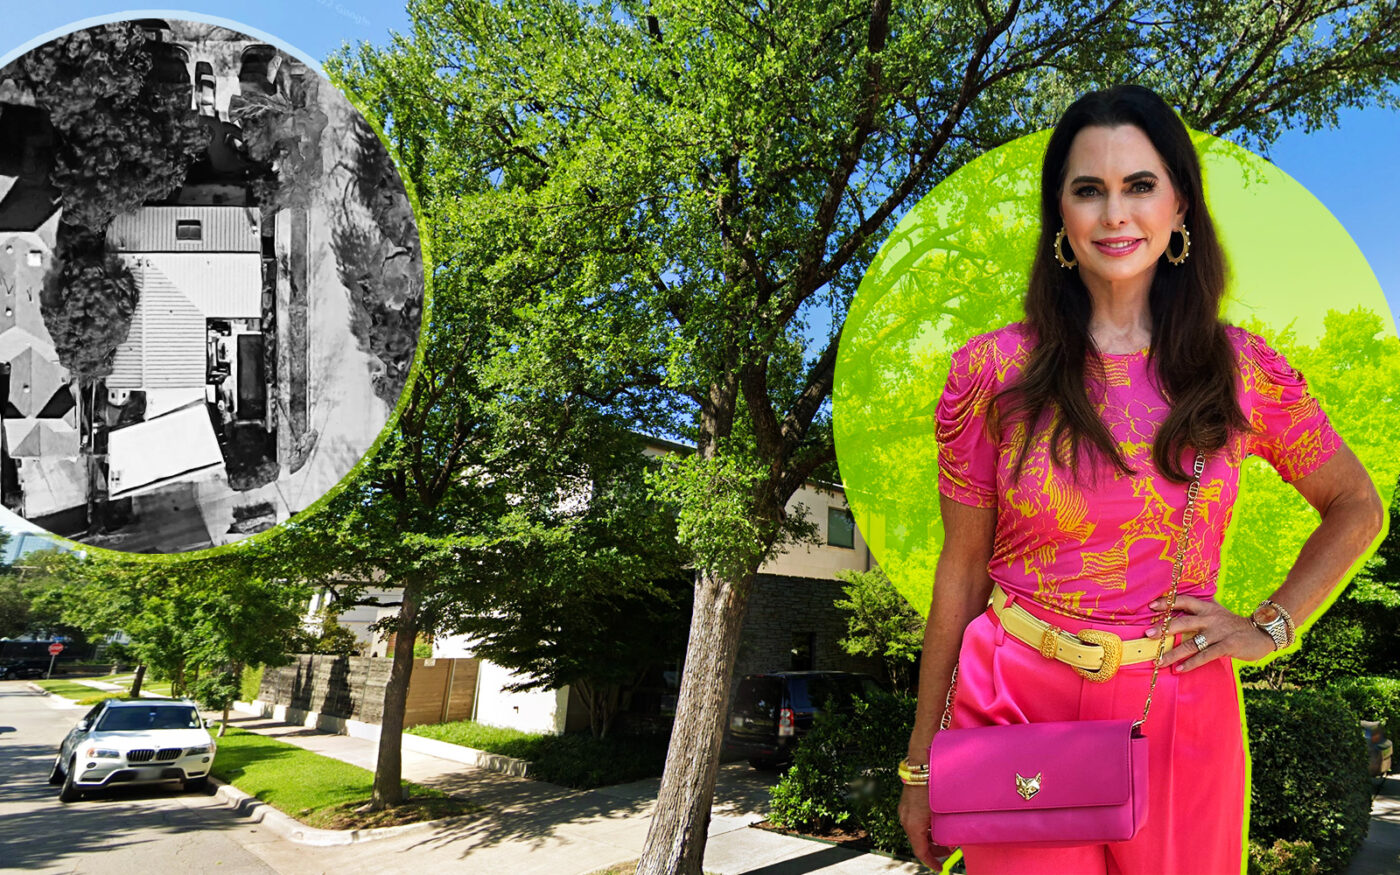 “Real Housewives” Star’s Dallas Mansion Listed For $5M